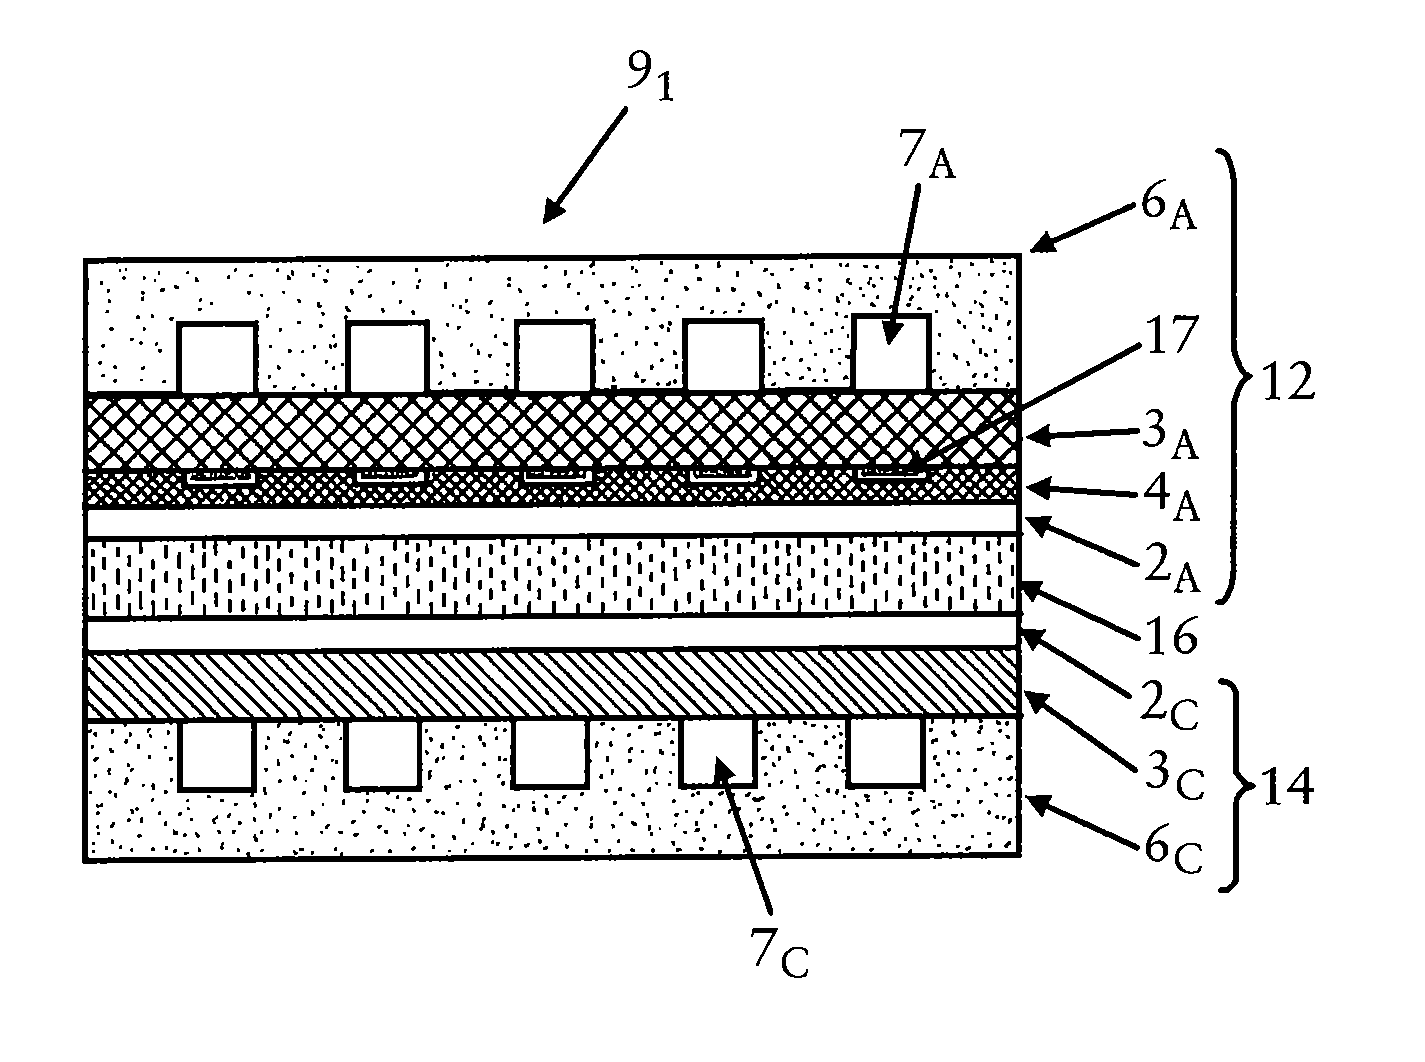 Anode electrodes for direct oxidation fuel cells and systems operating with concentrated liquid fuel